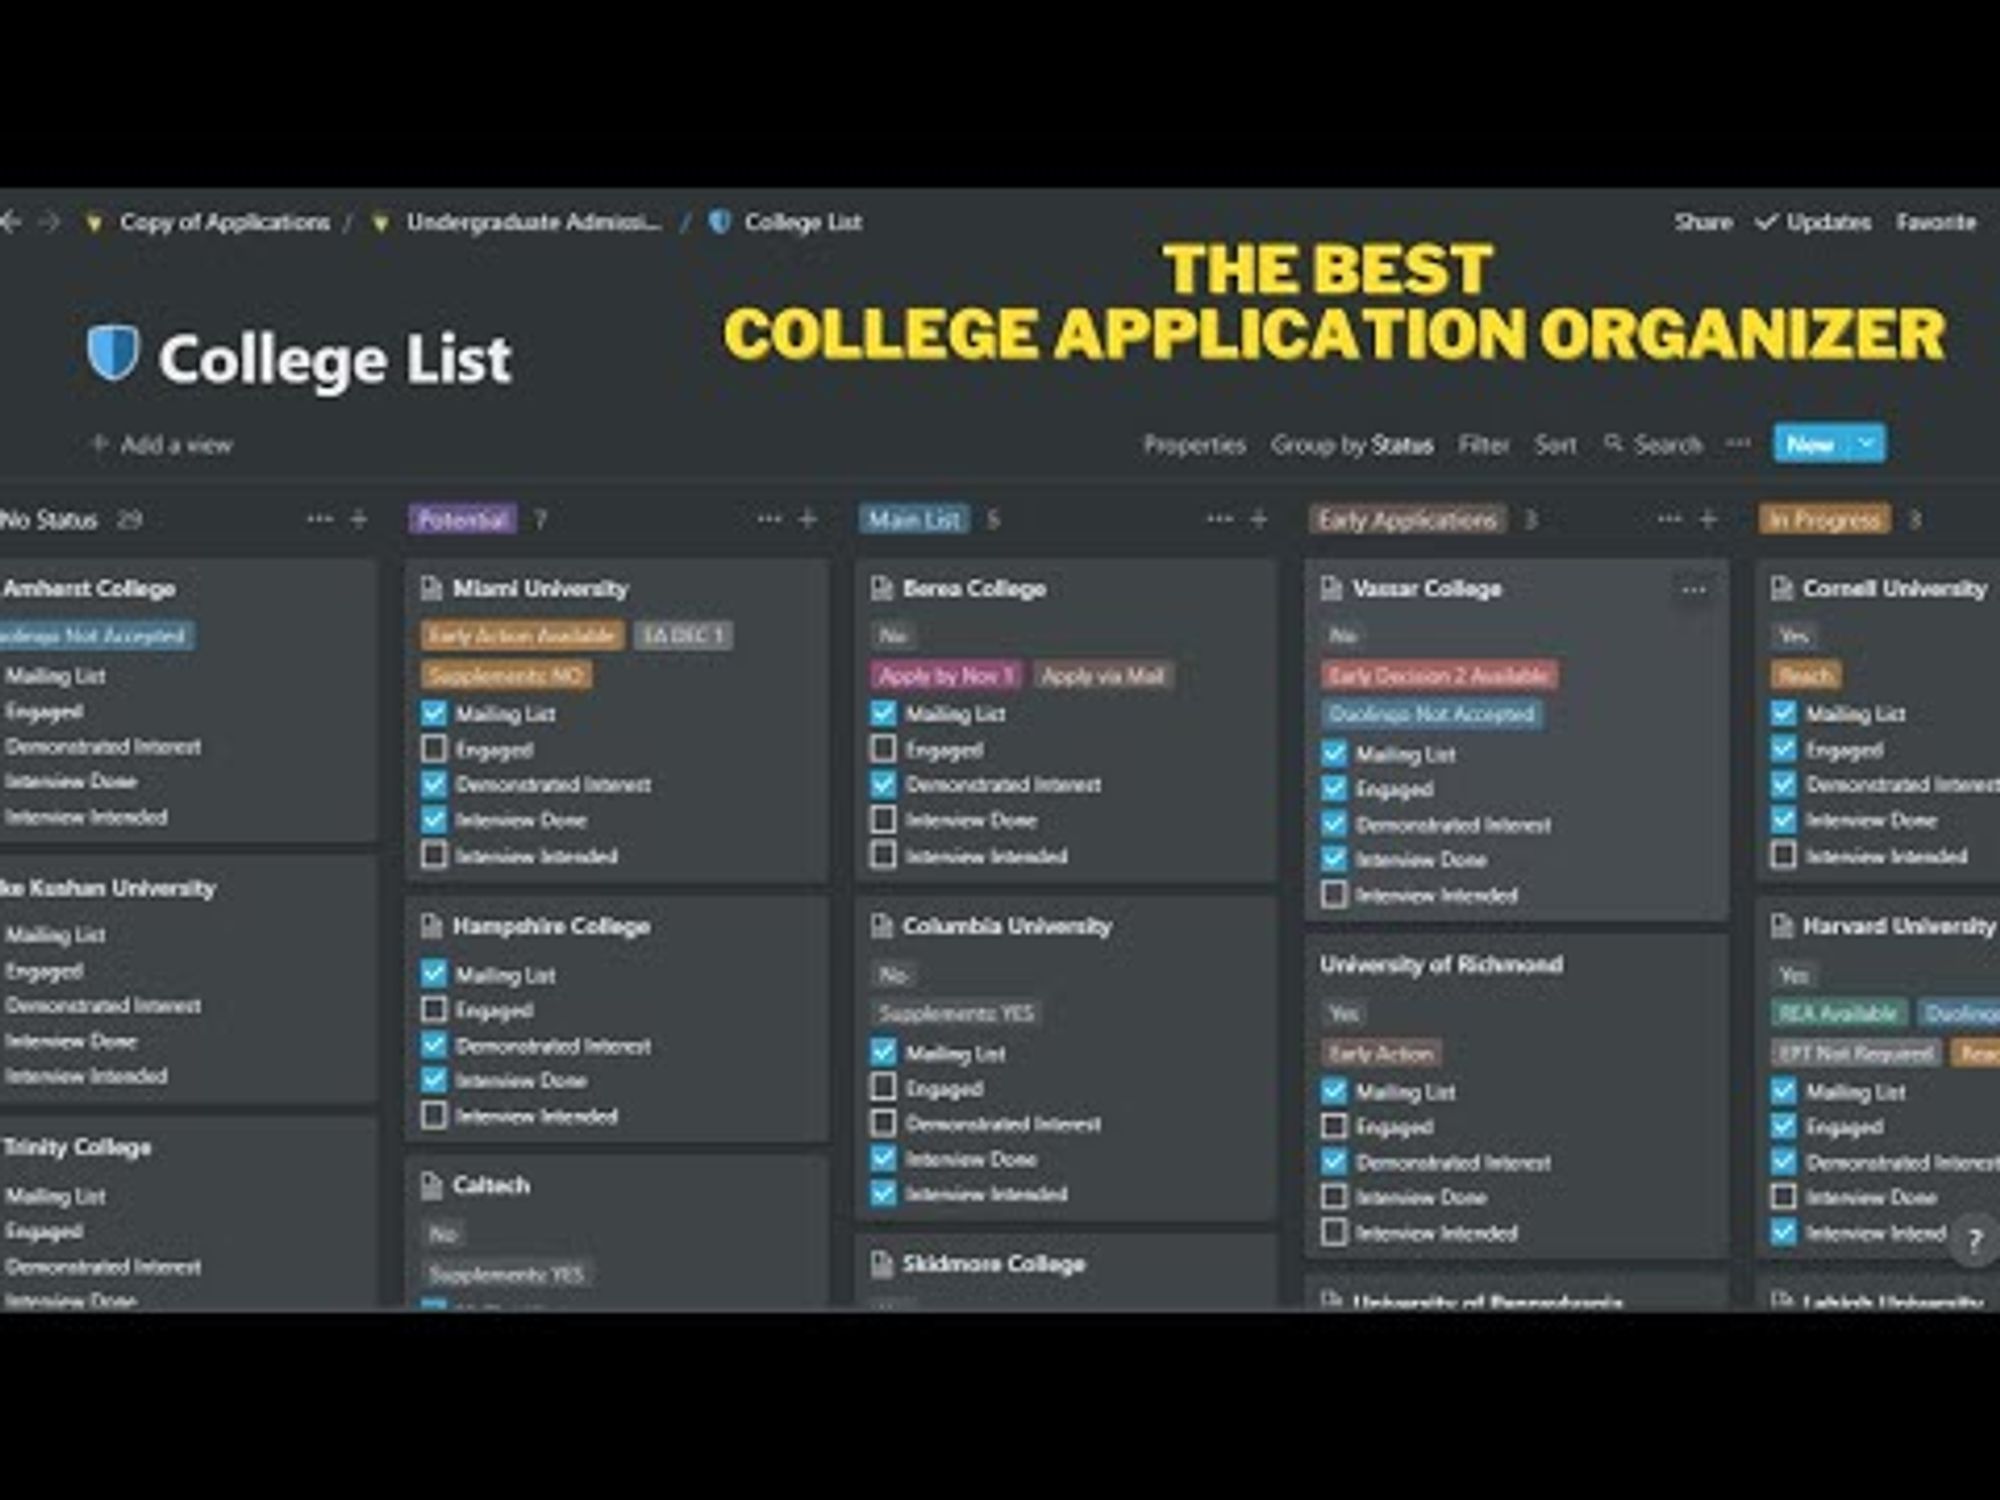 THE BEST College Application Organizing System | Talha's Admissions Blog